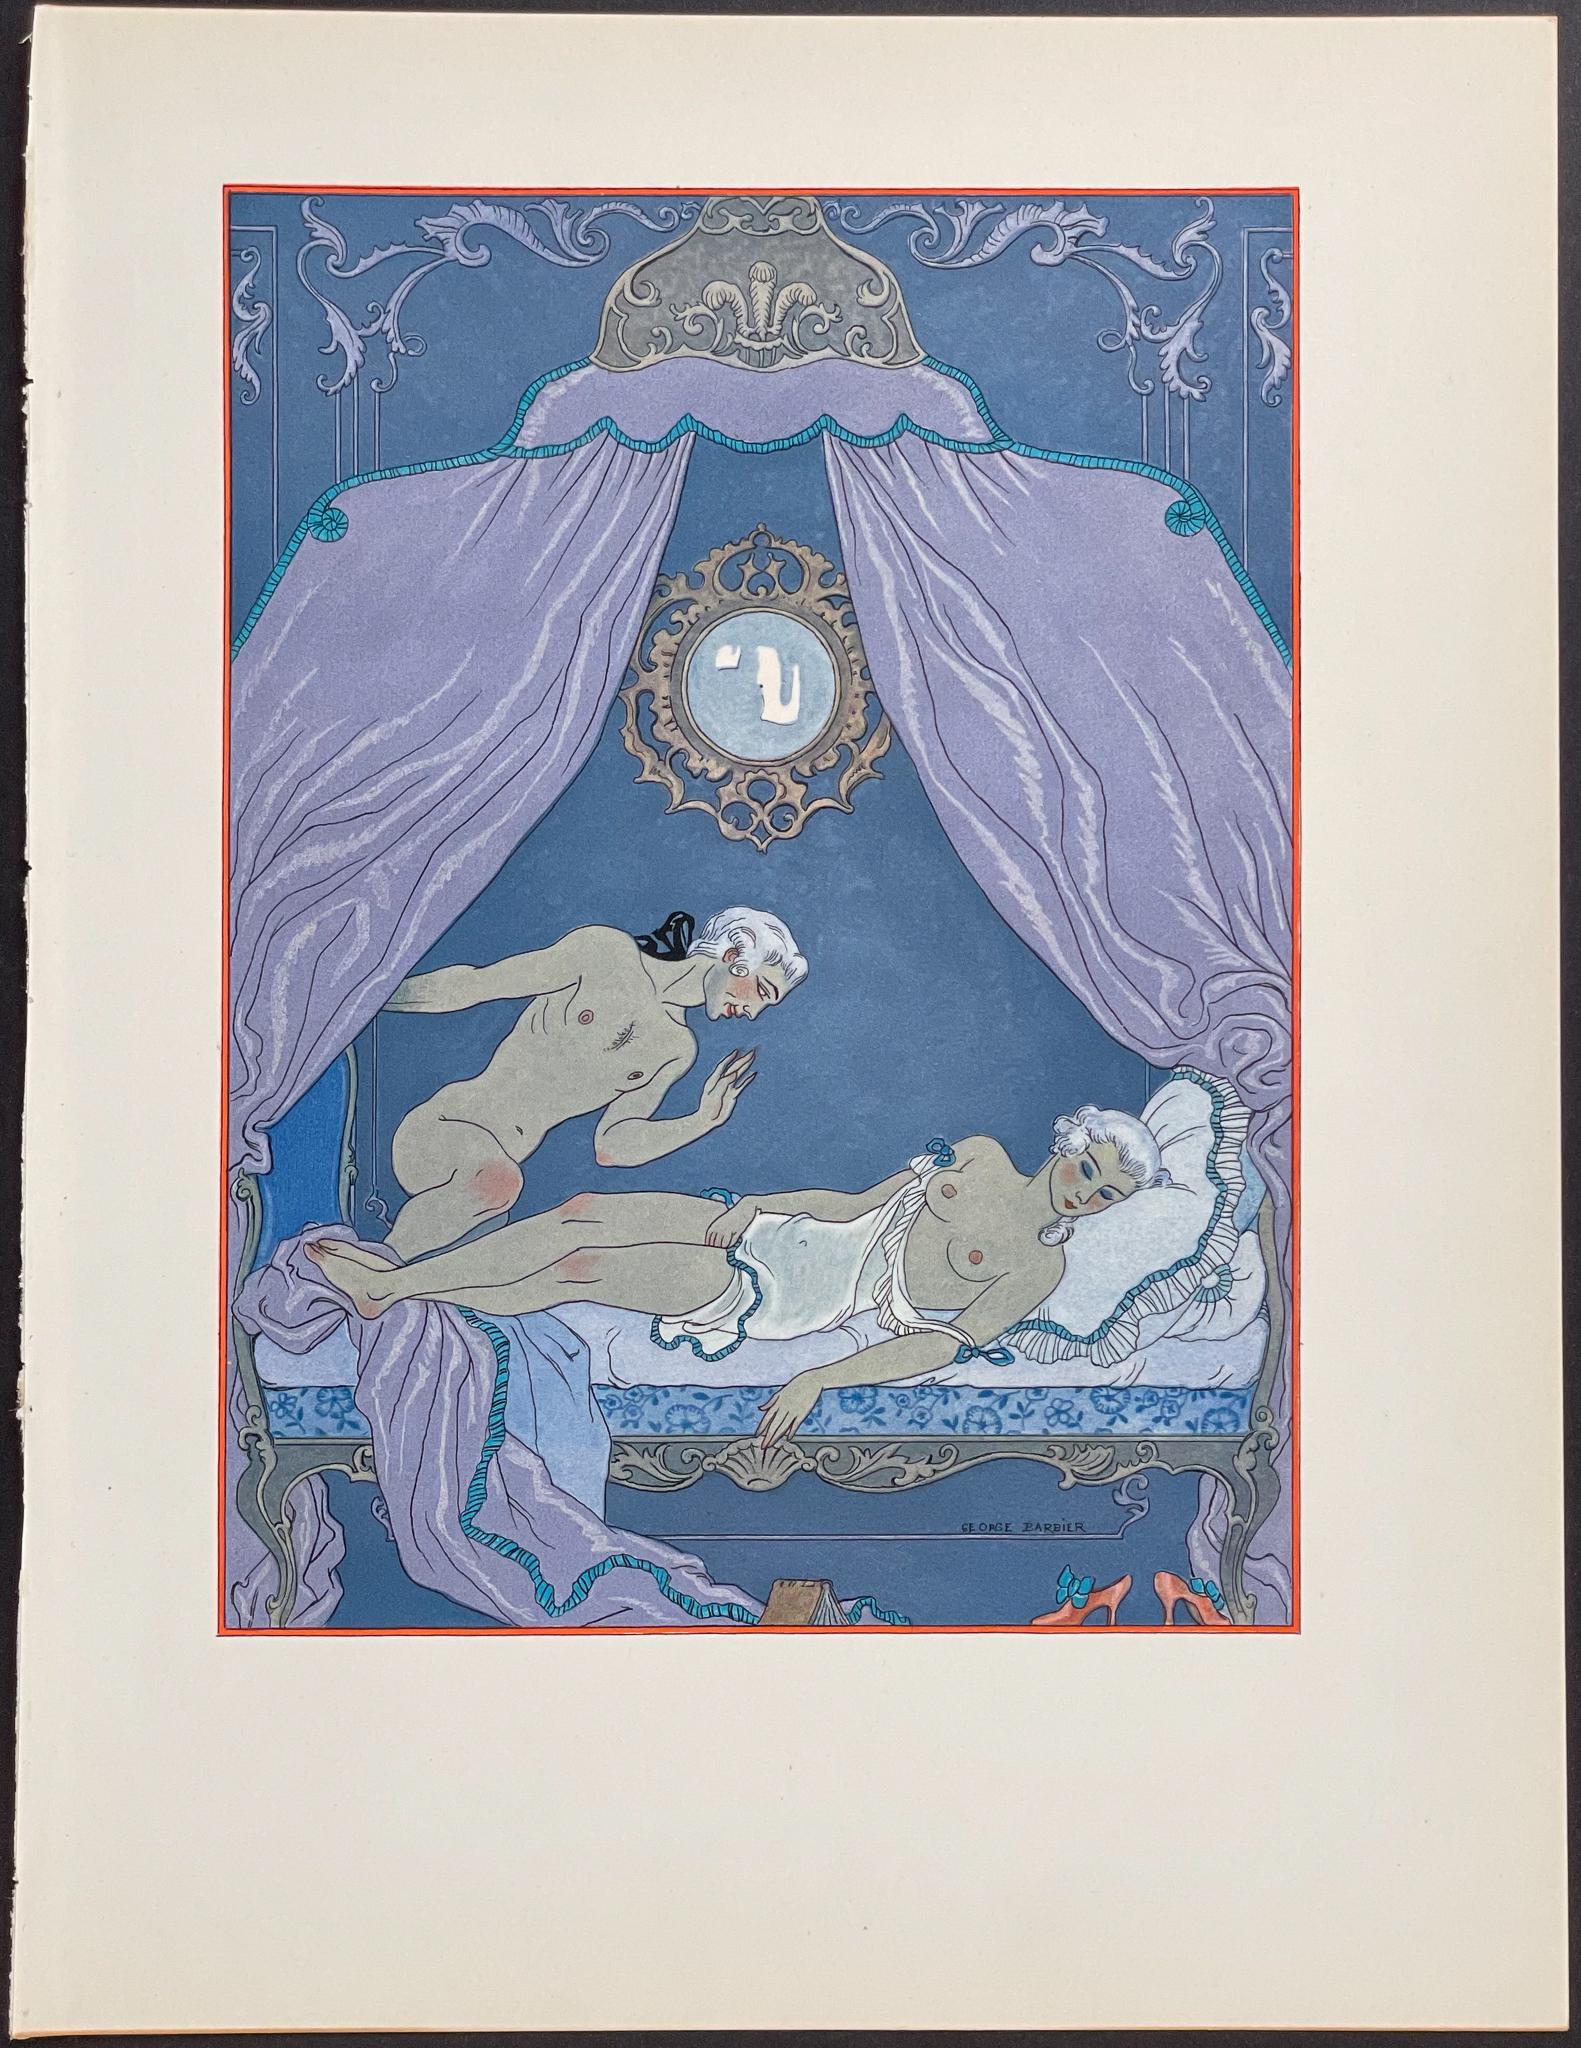 "Nude Couple in Canopied Bed" by Georges Barbier